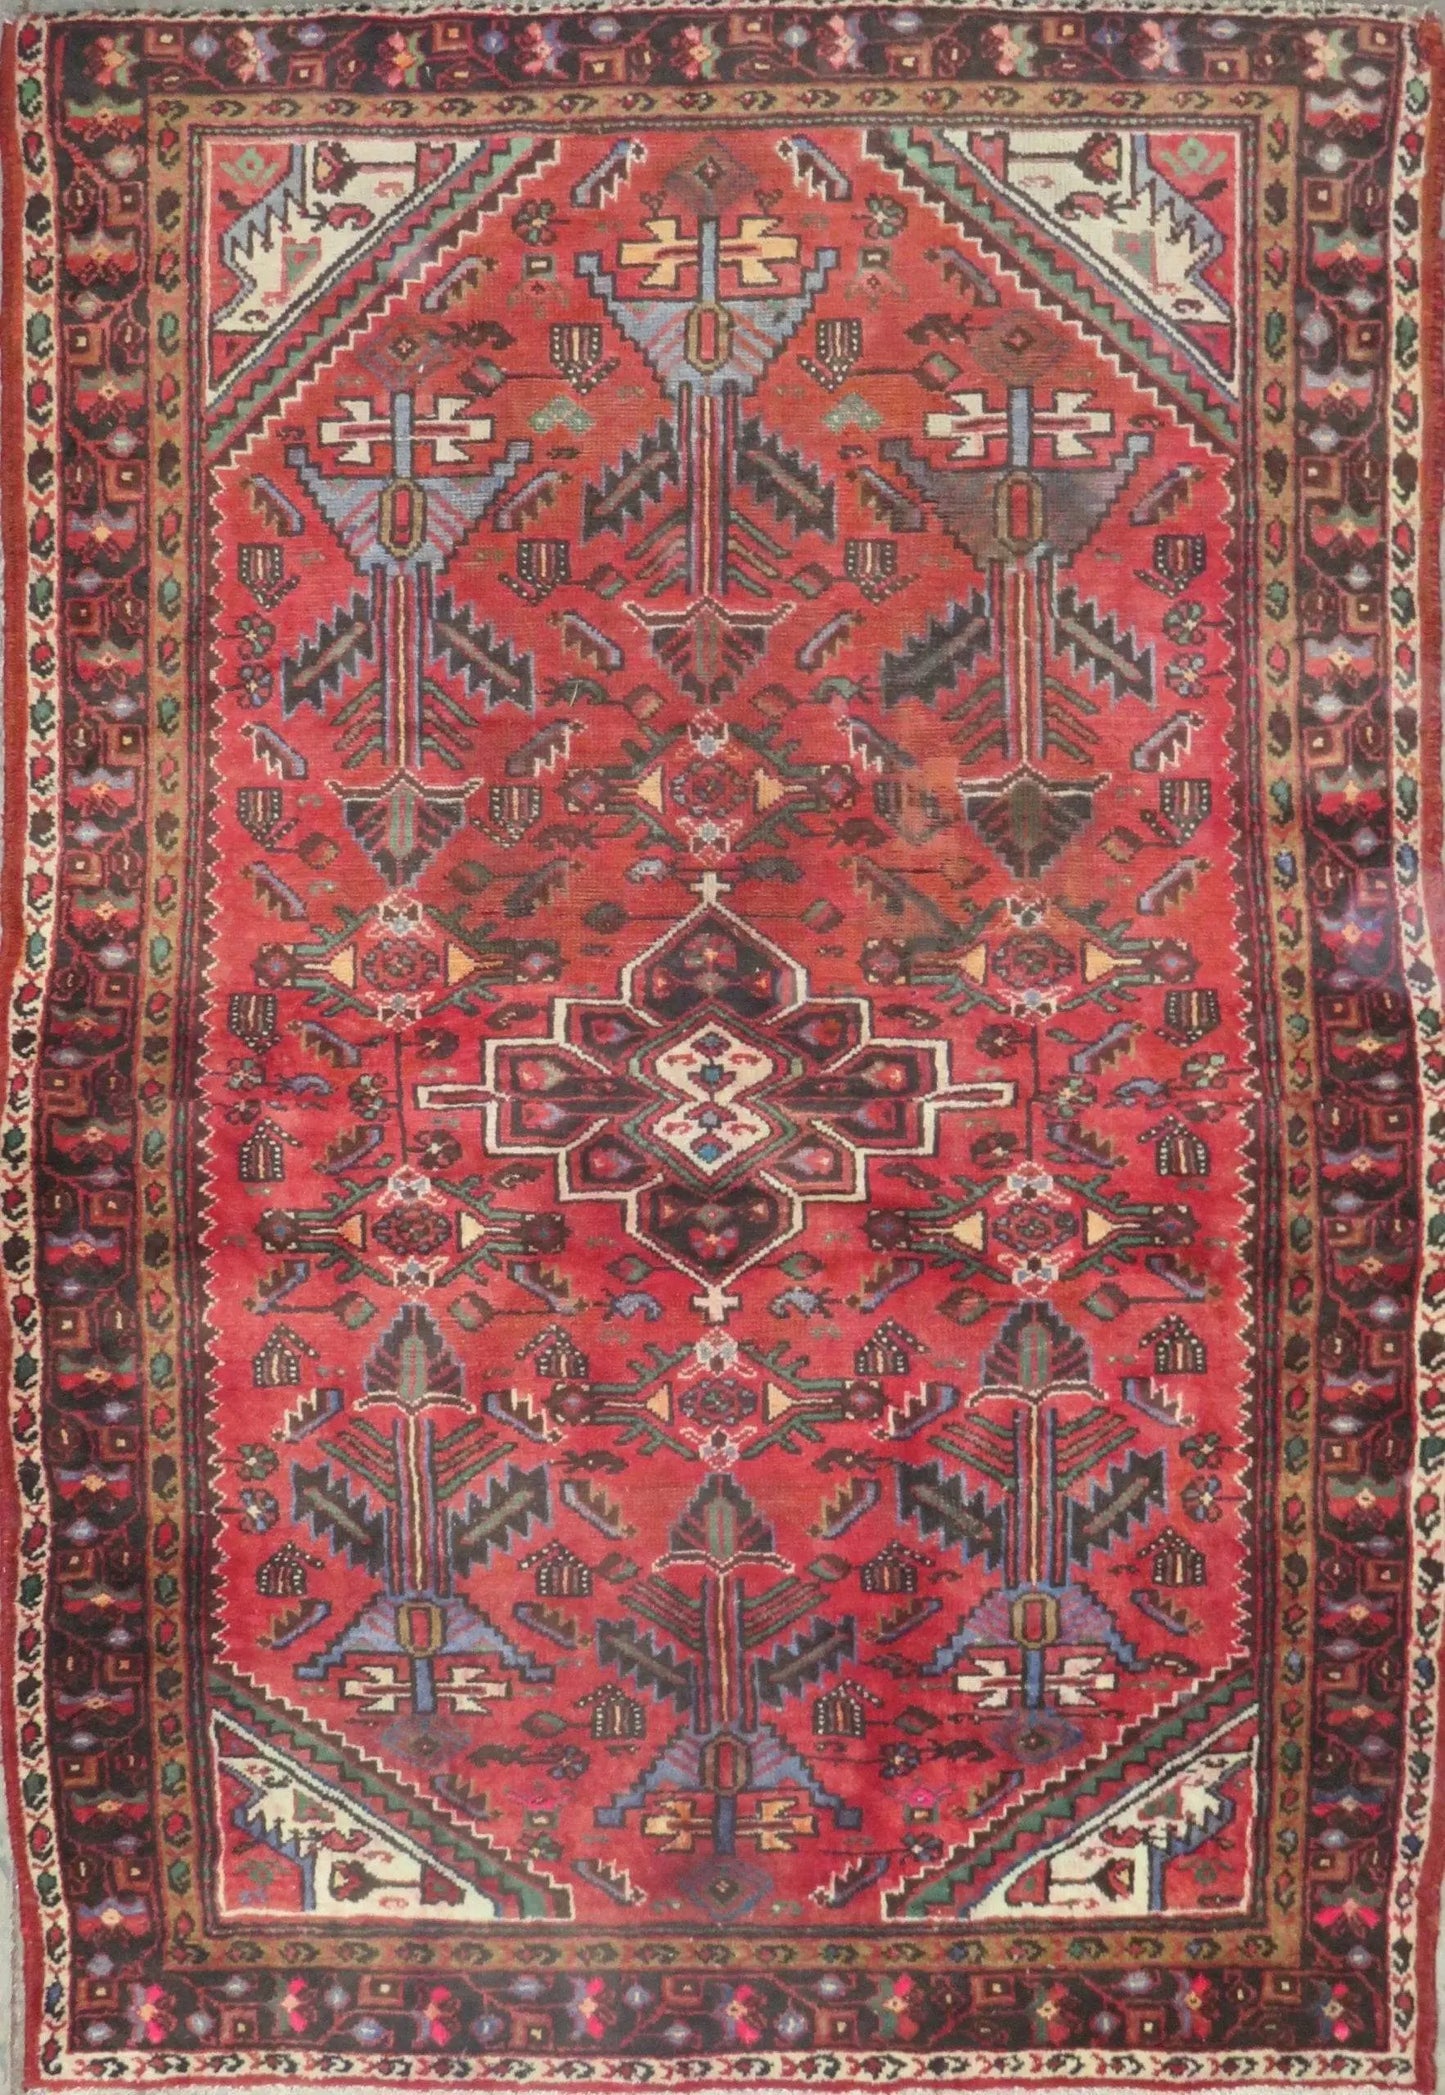 Hand-Knotted Vintage Rug 6'10" x 4'8"